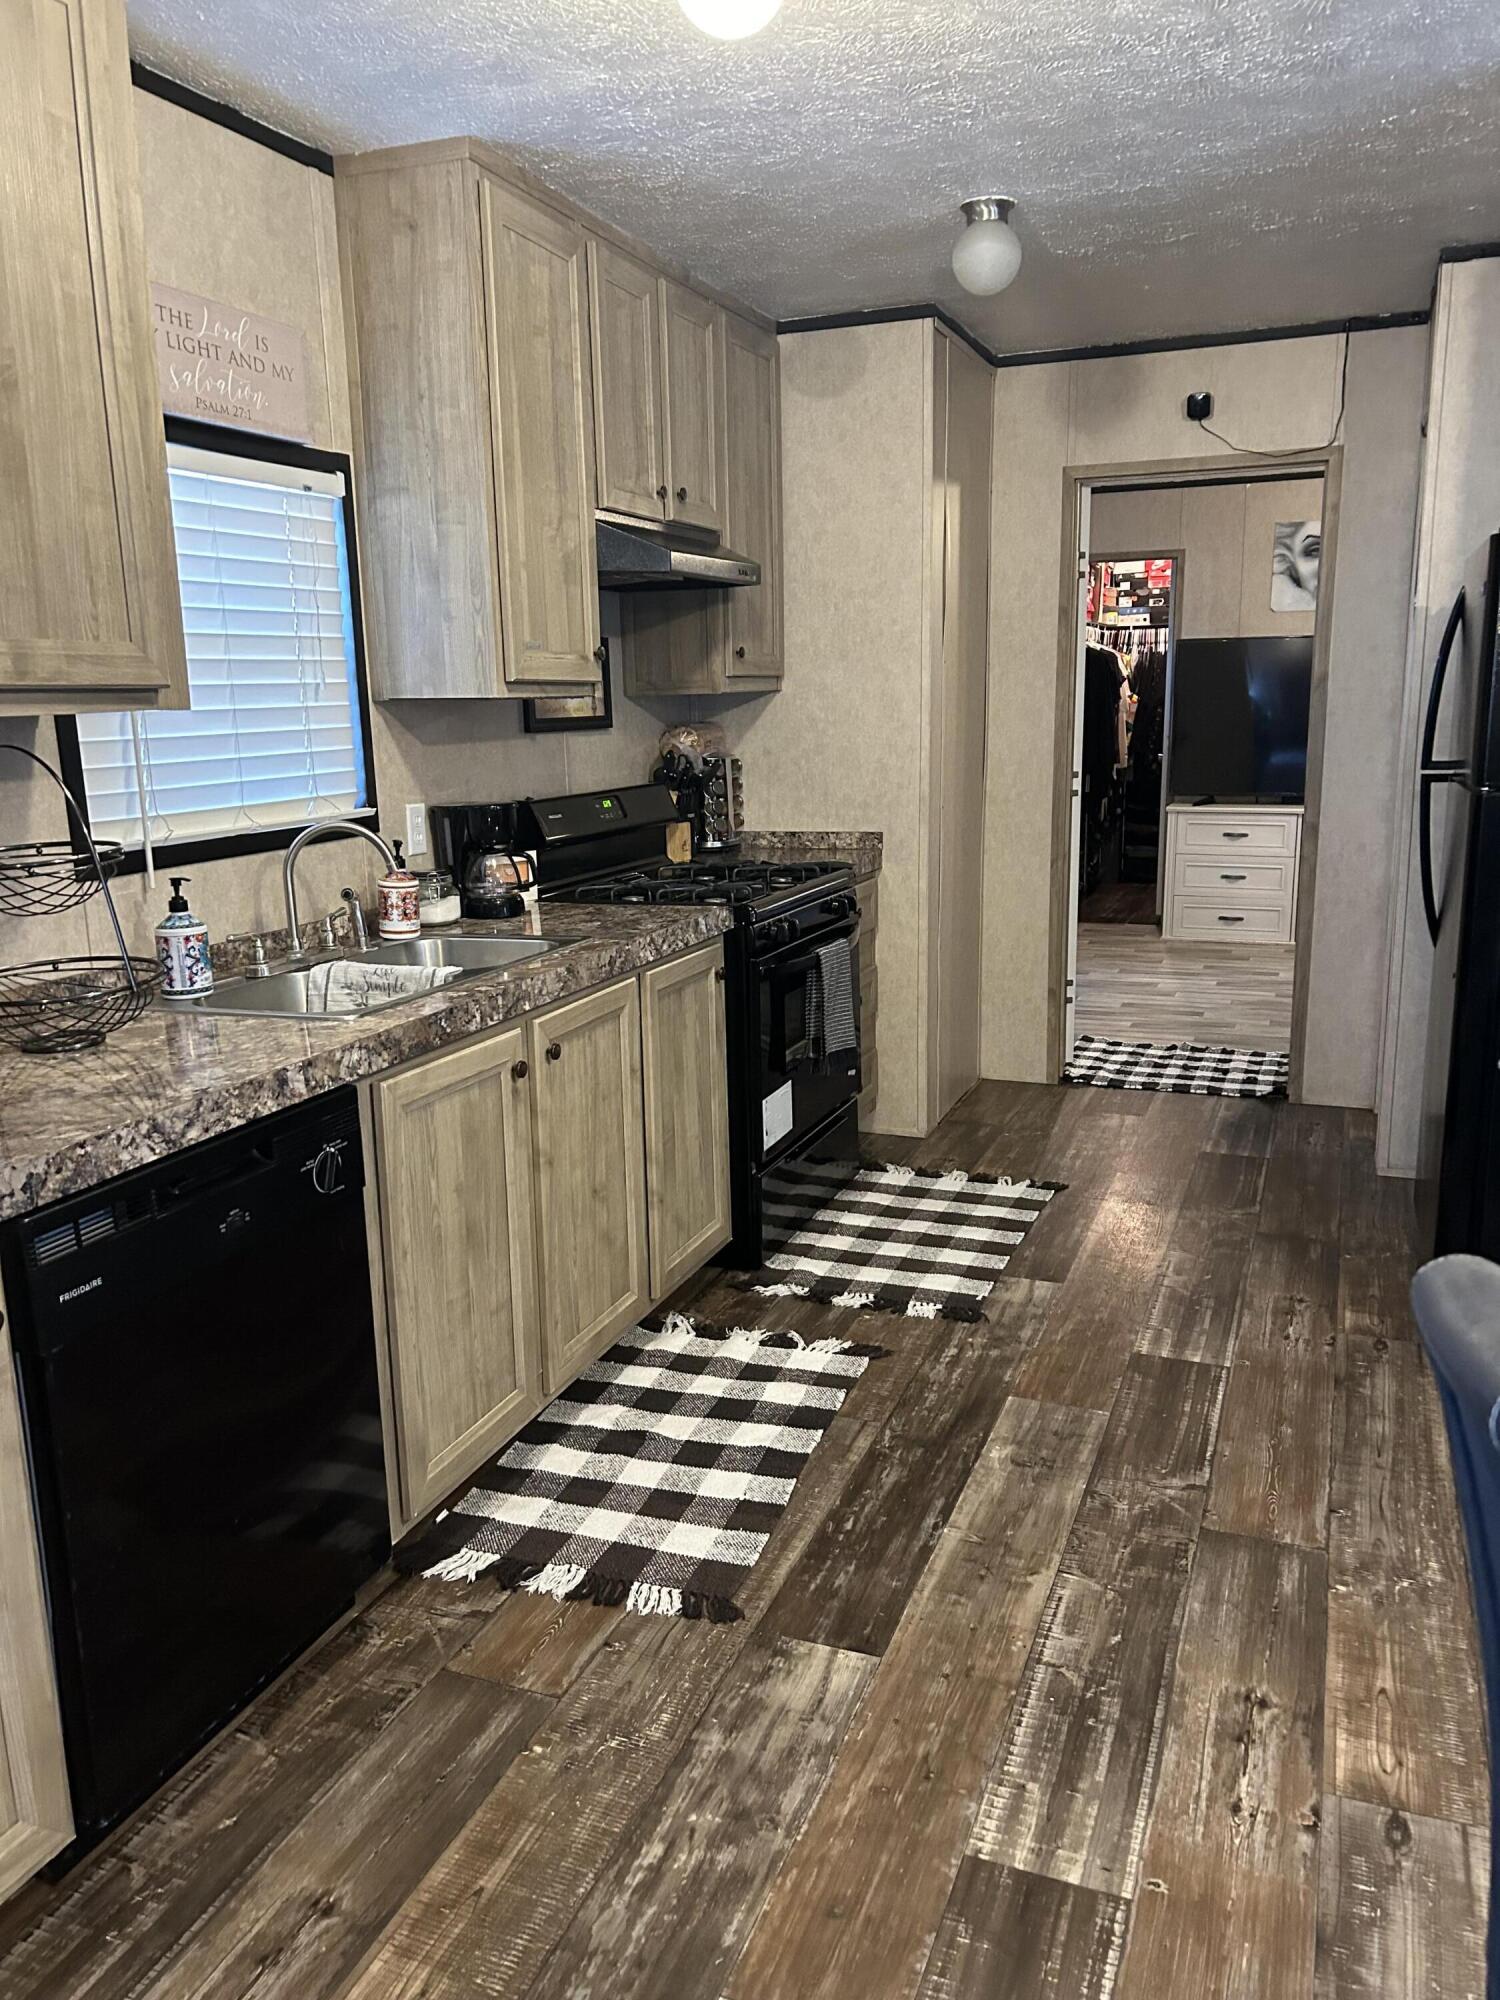 Cleanest and best well kept Manufactured home you have ever been in!!!Seller bought this unit brand new and has kept it immaculate. Come see for yourself. Decent side/back yard area for dogs or relaxing after a long day! Inside is spic and span with no carpet. two blocks from the playground and food trucks! Land lease is $617.00/month.